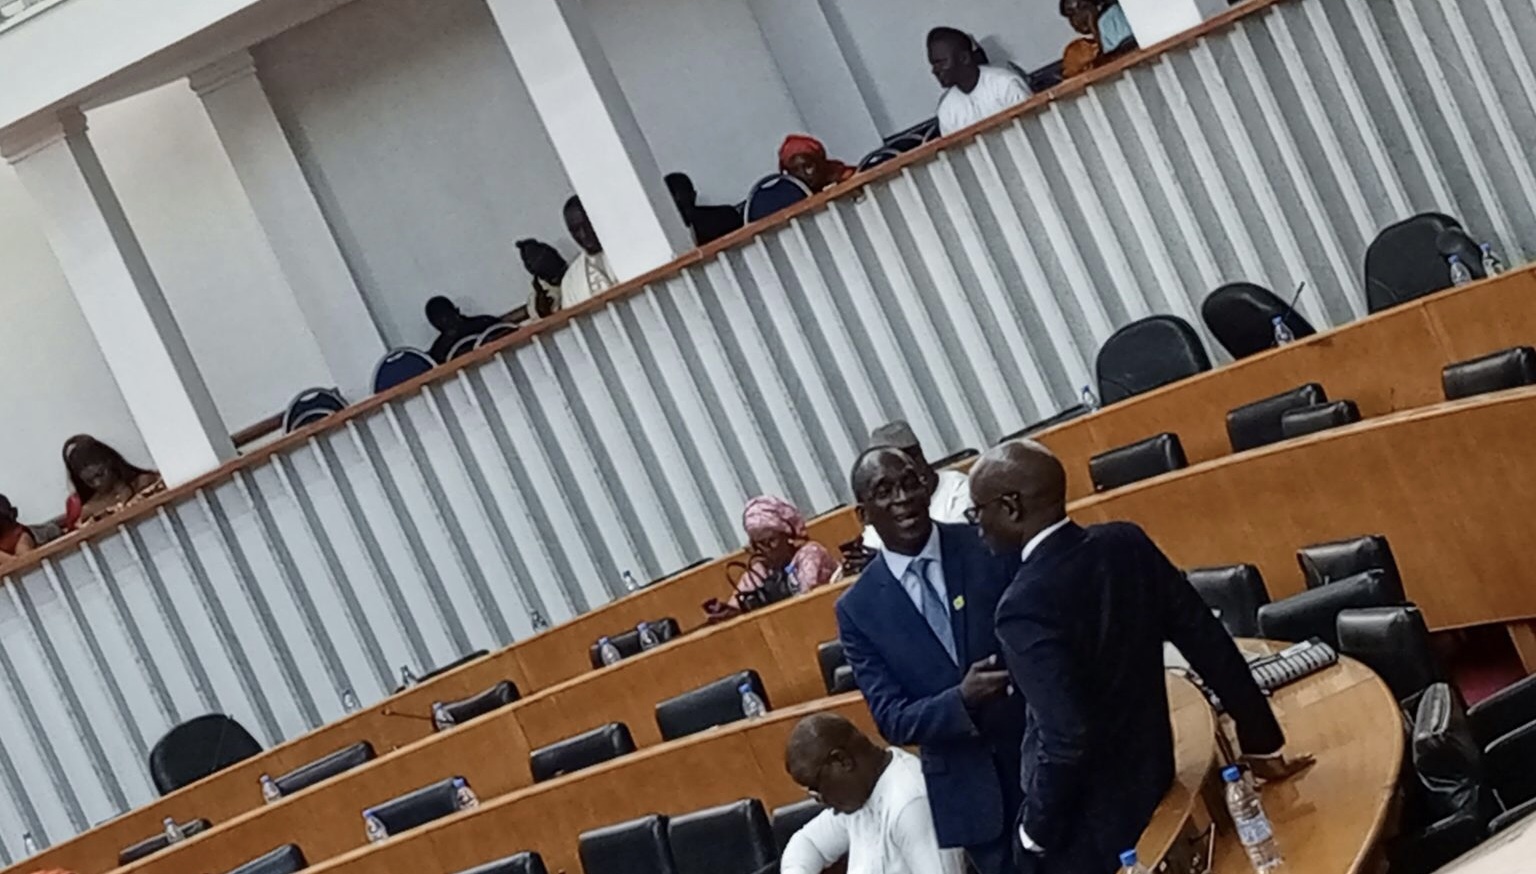 You are currently viewing Assemblée Nationale: Dans les coulisses, Thierno Alassane Sall et Abdoulaye Diouf Sarr s’isolent pour discuter.